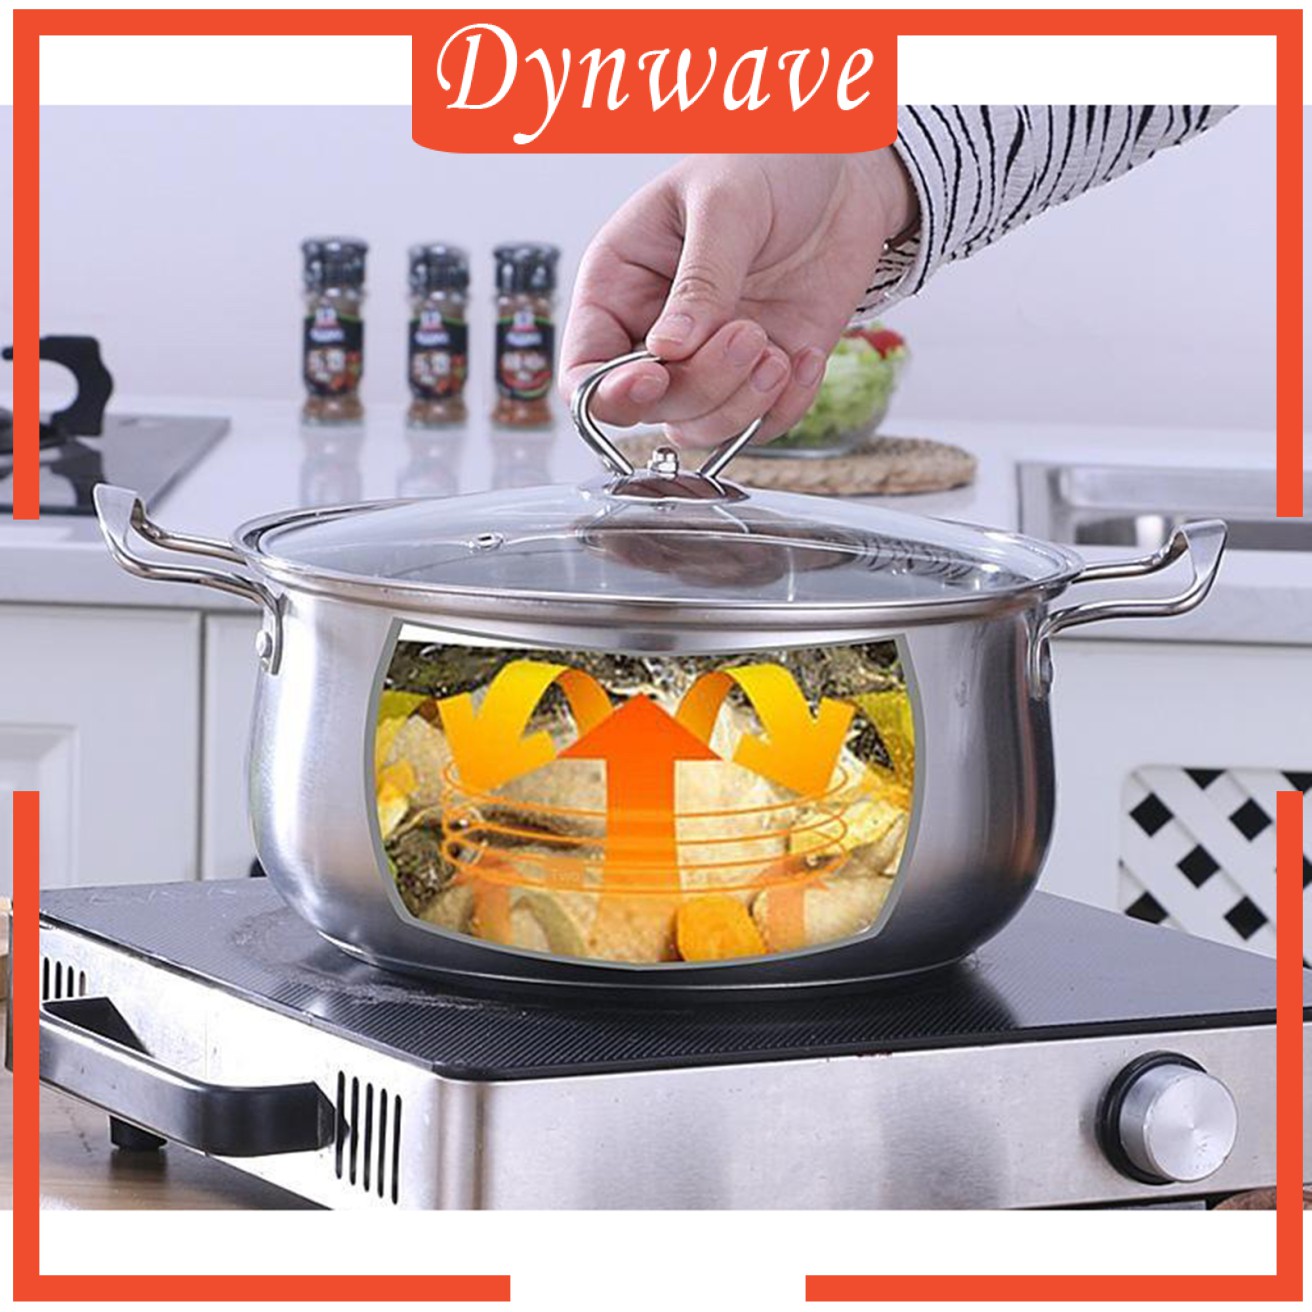 [DYNWAVE] Stainless Steel Soup Pan Saucepan Stockpot Non Stick Camping Picnic Cookware